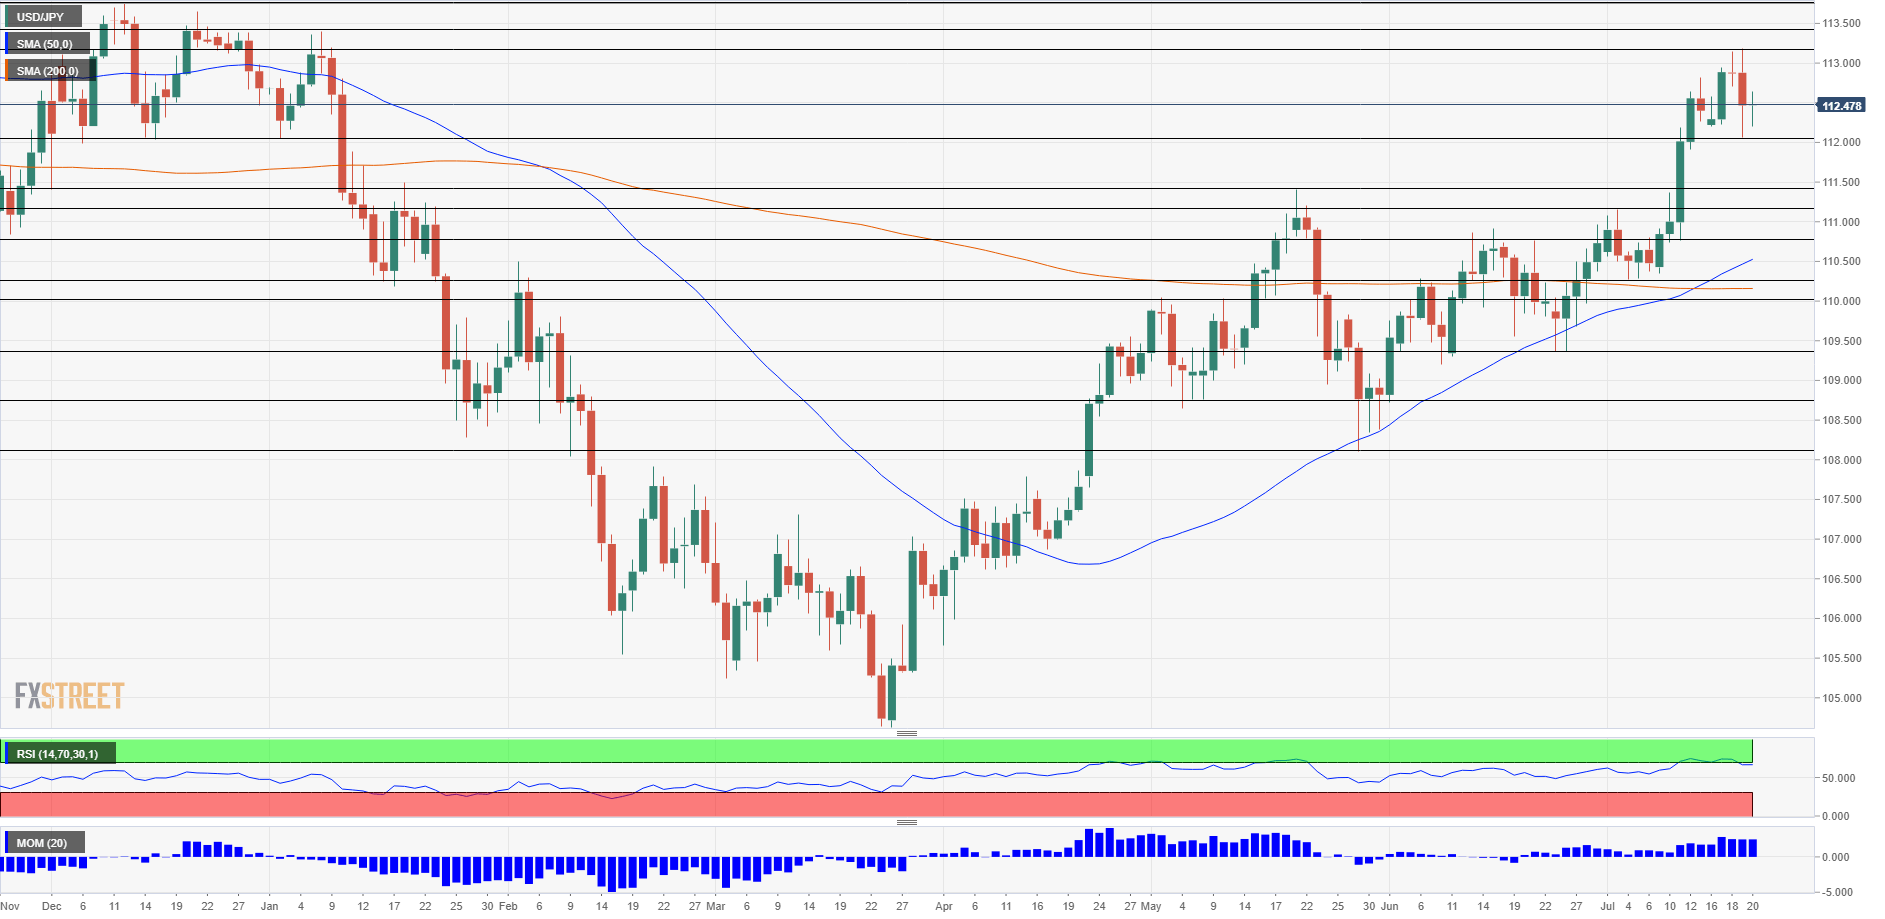 USD JPY technical analysis July 23 27 2018